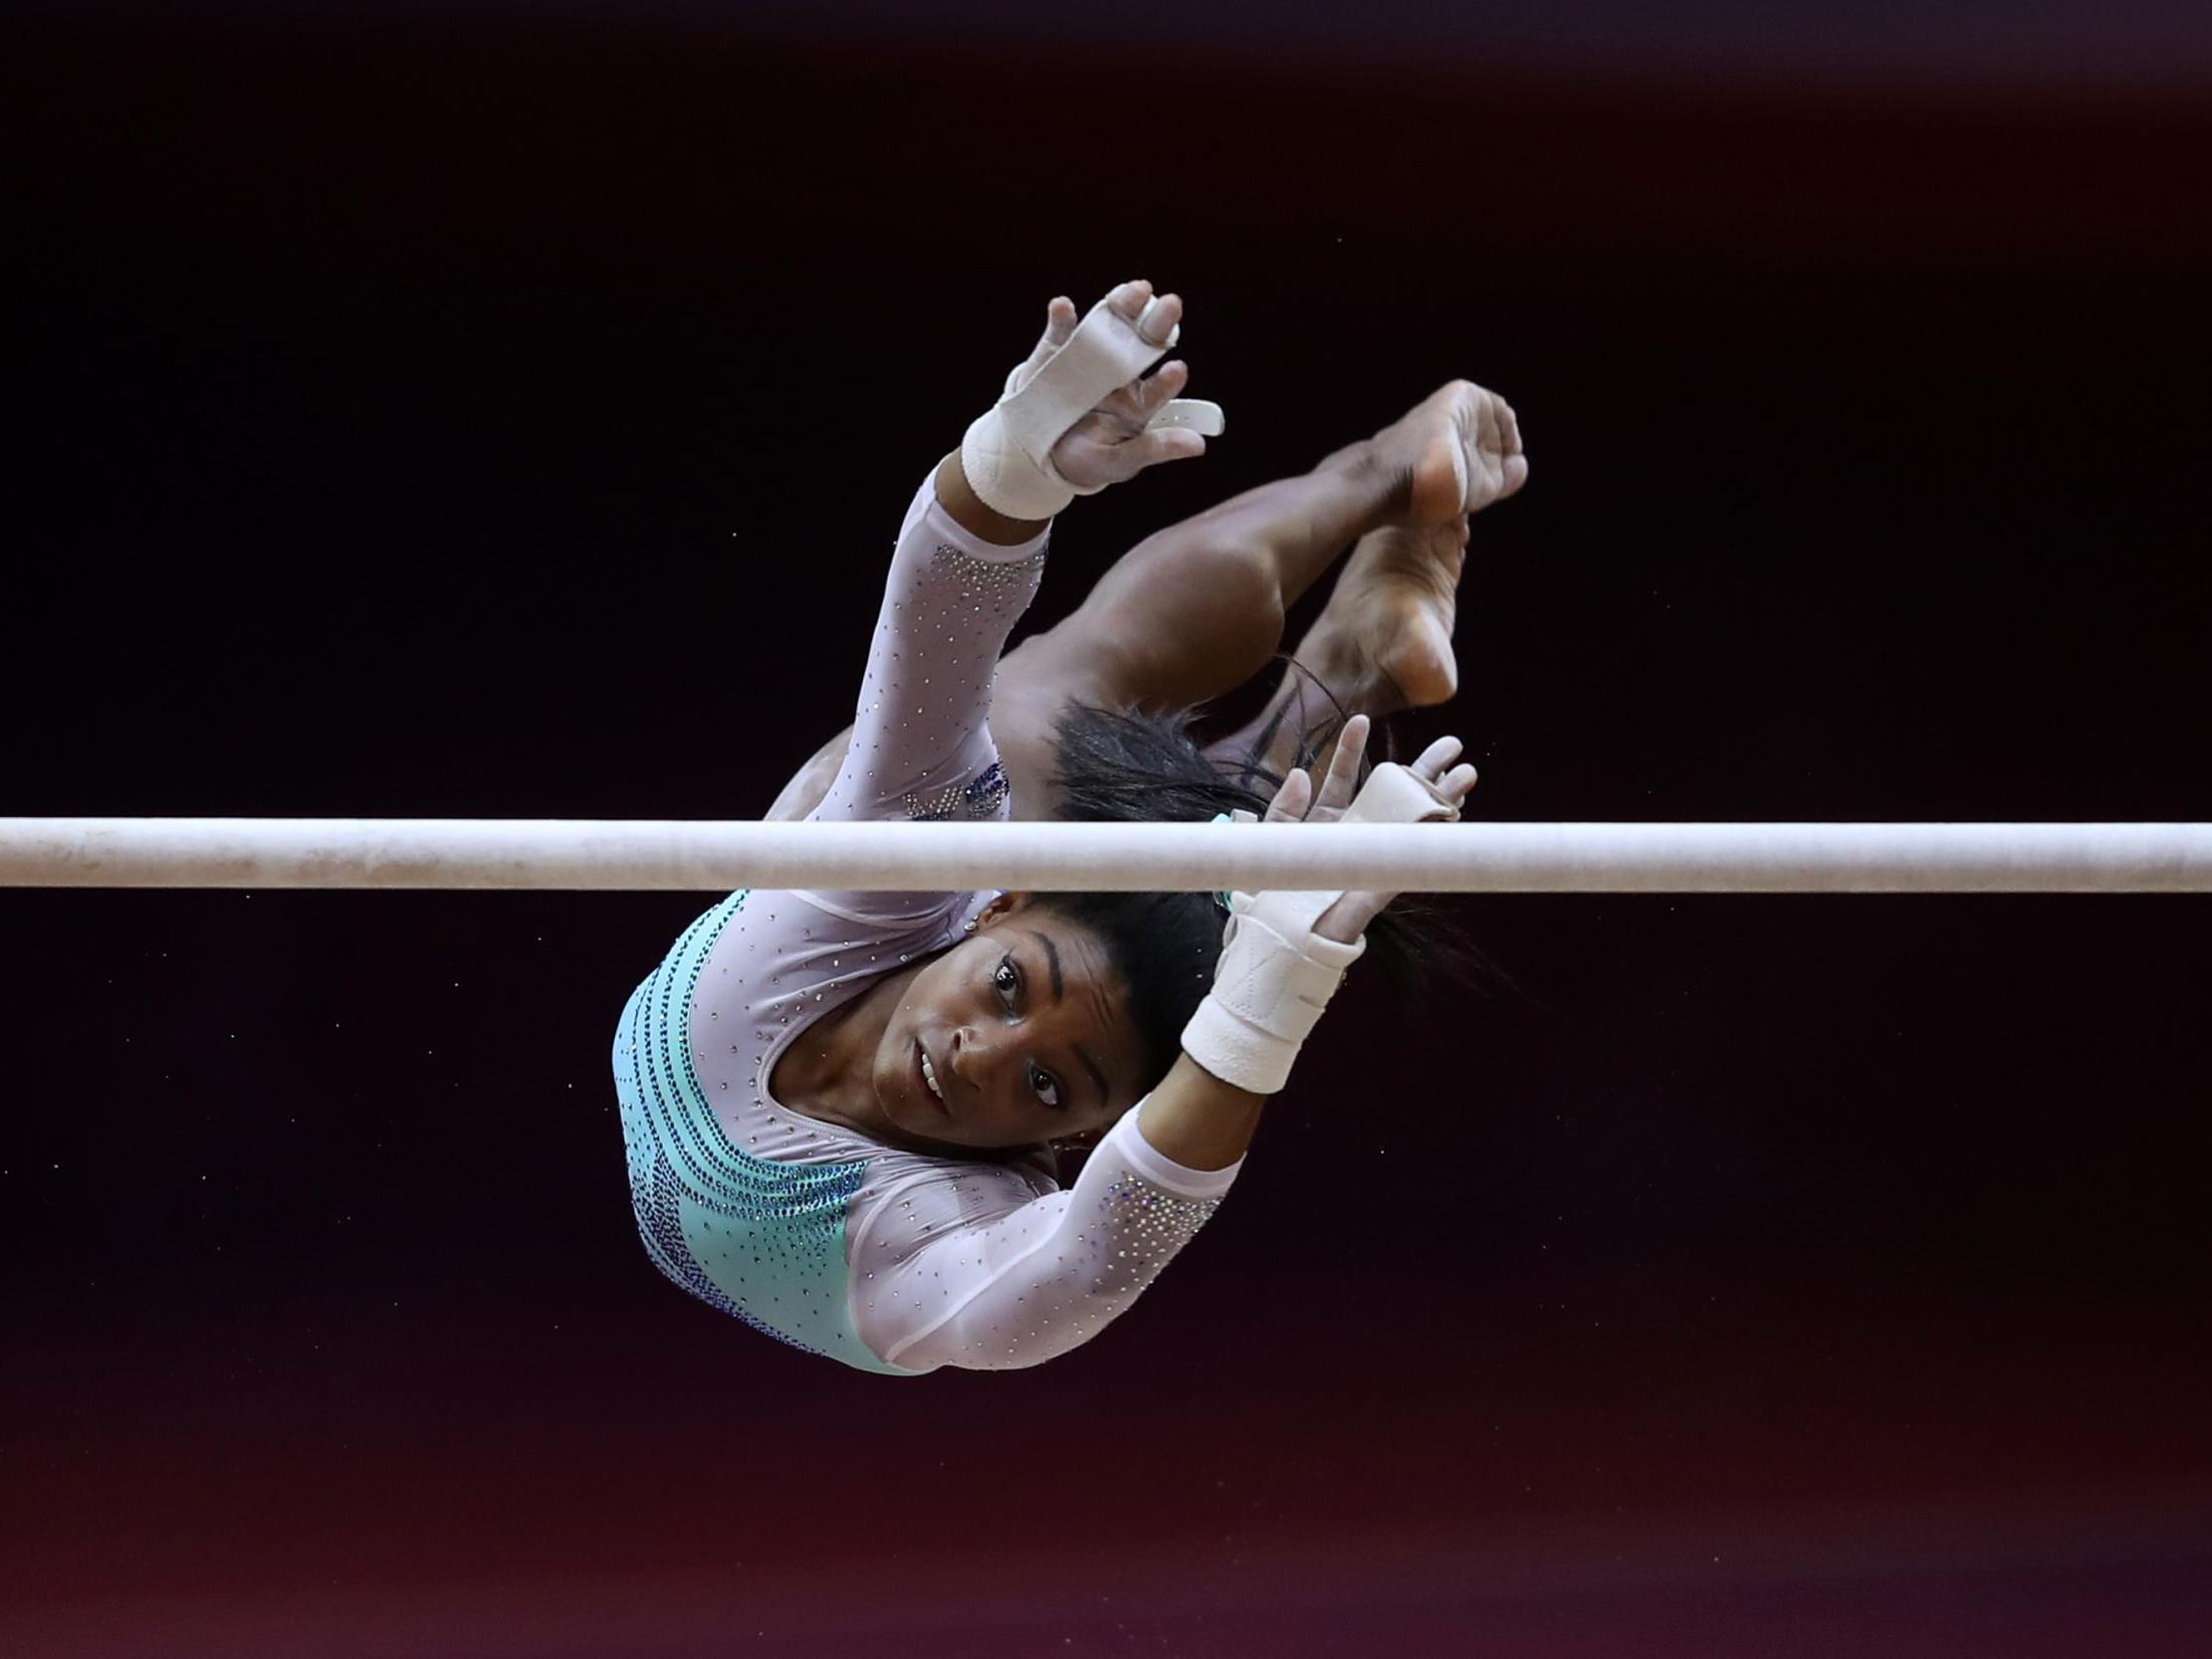 Biles is changing the face of her sport